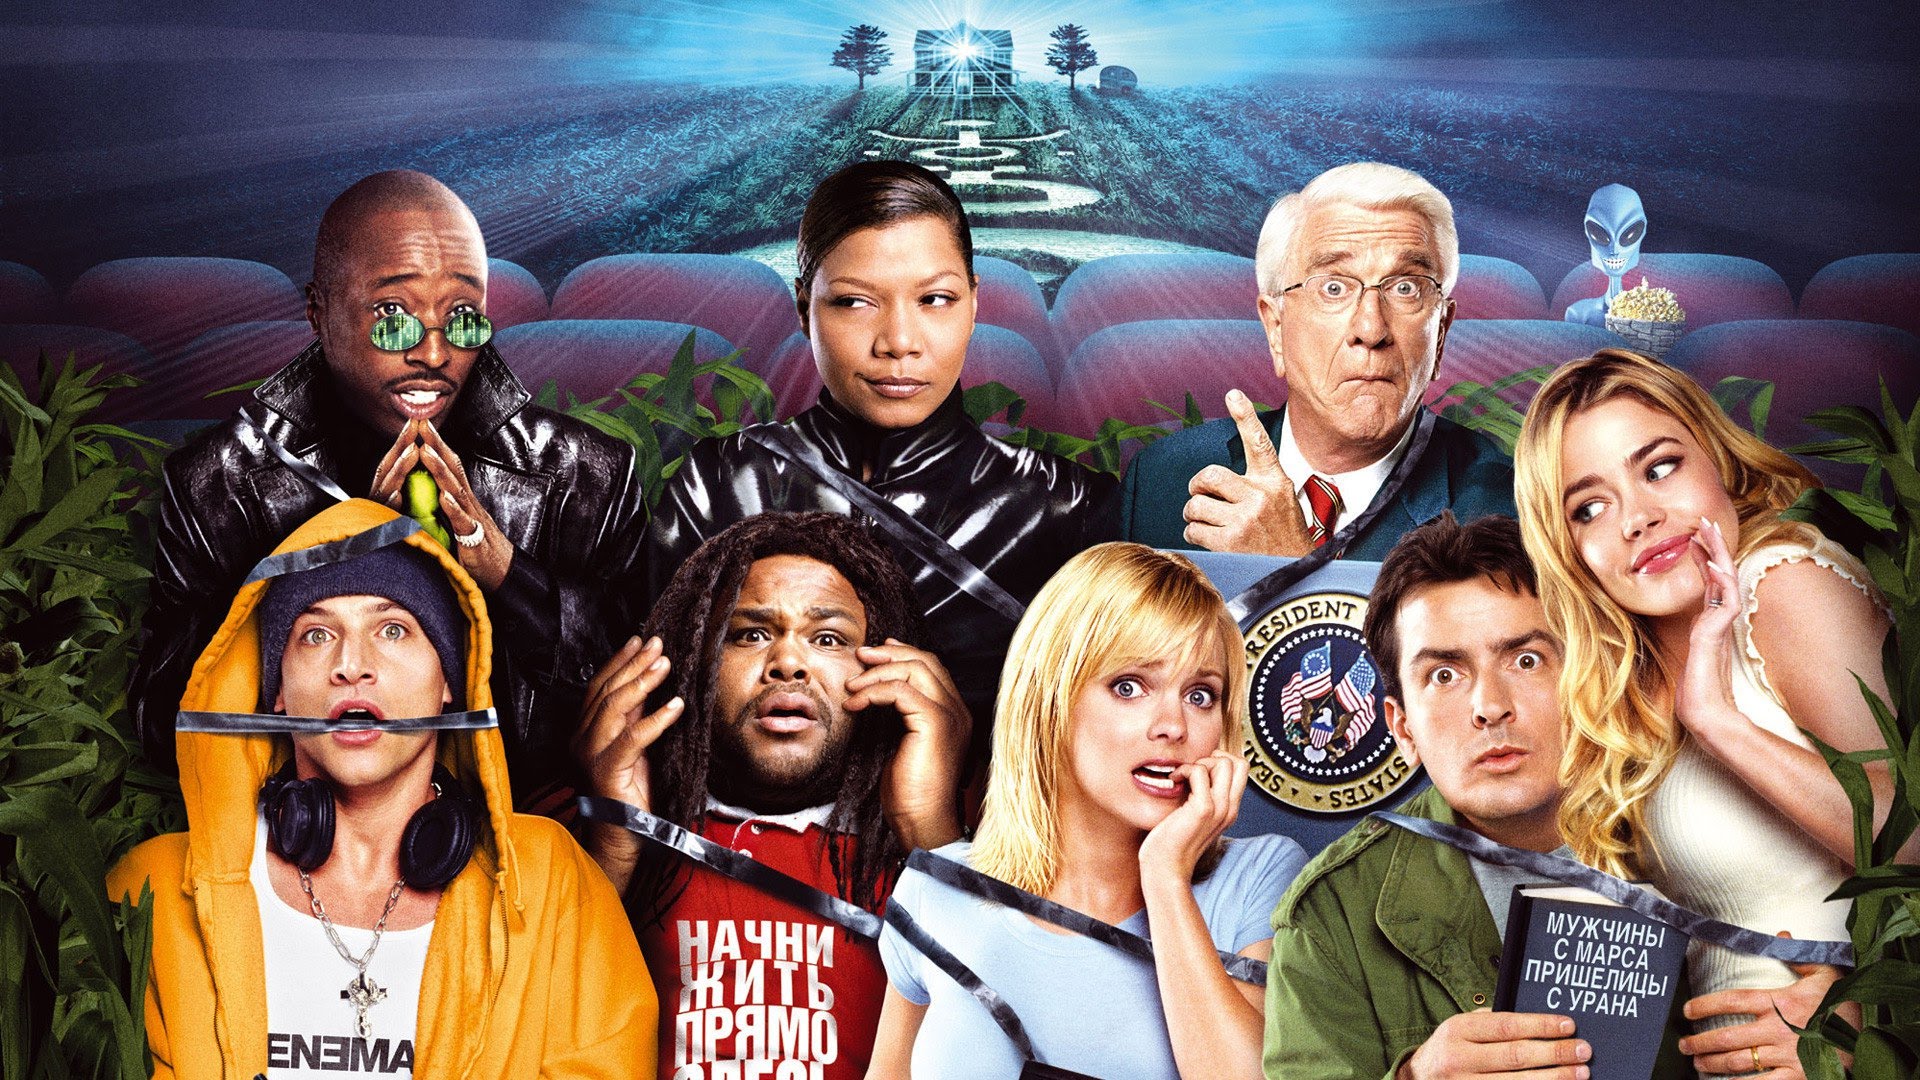 Scary Movie 3 Backgrounds, Compatible - PC, Mobile, Gadgets| 1920x1080 px